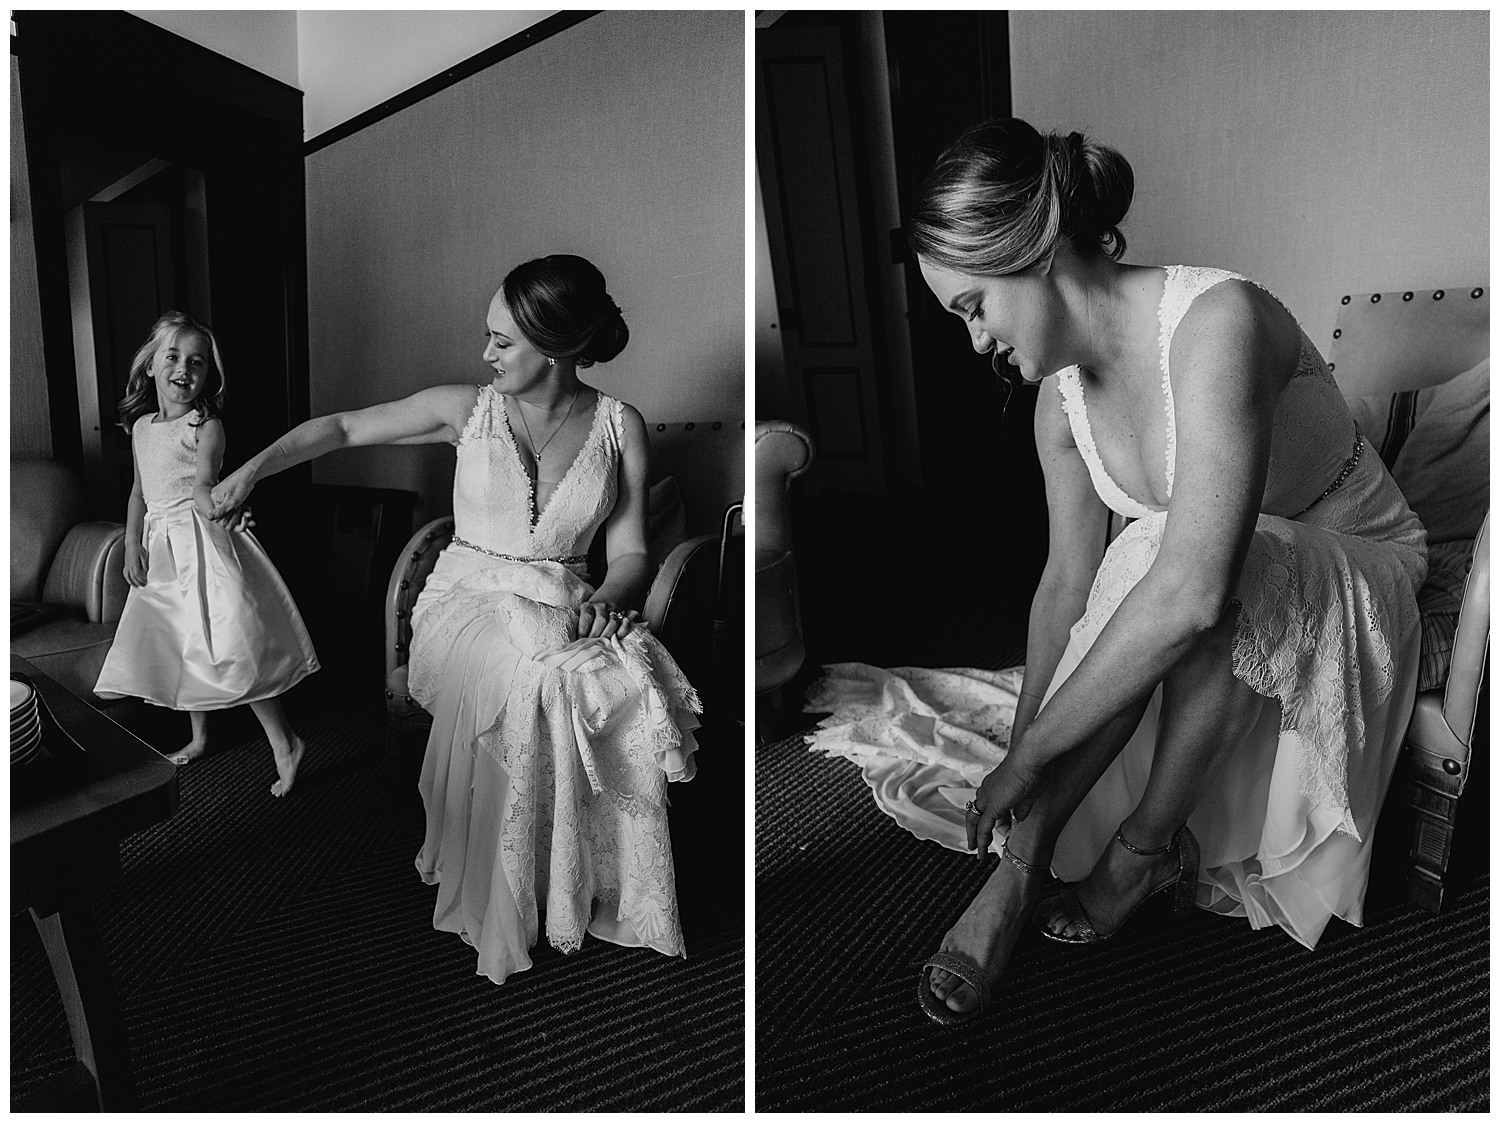 A bride plays with a flower girl and on the right the bride clasps her shoes